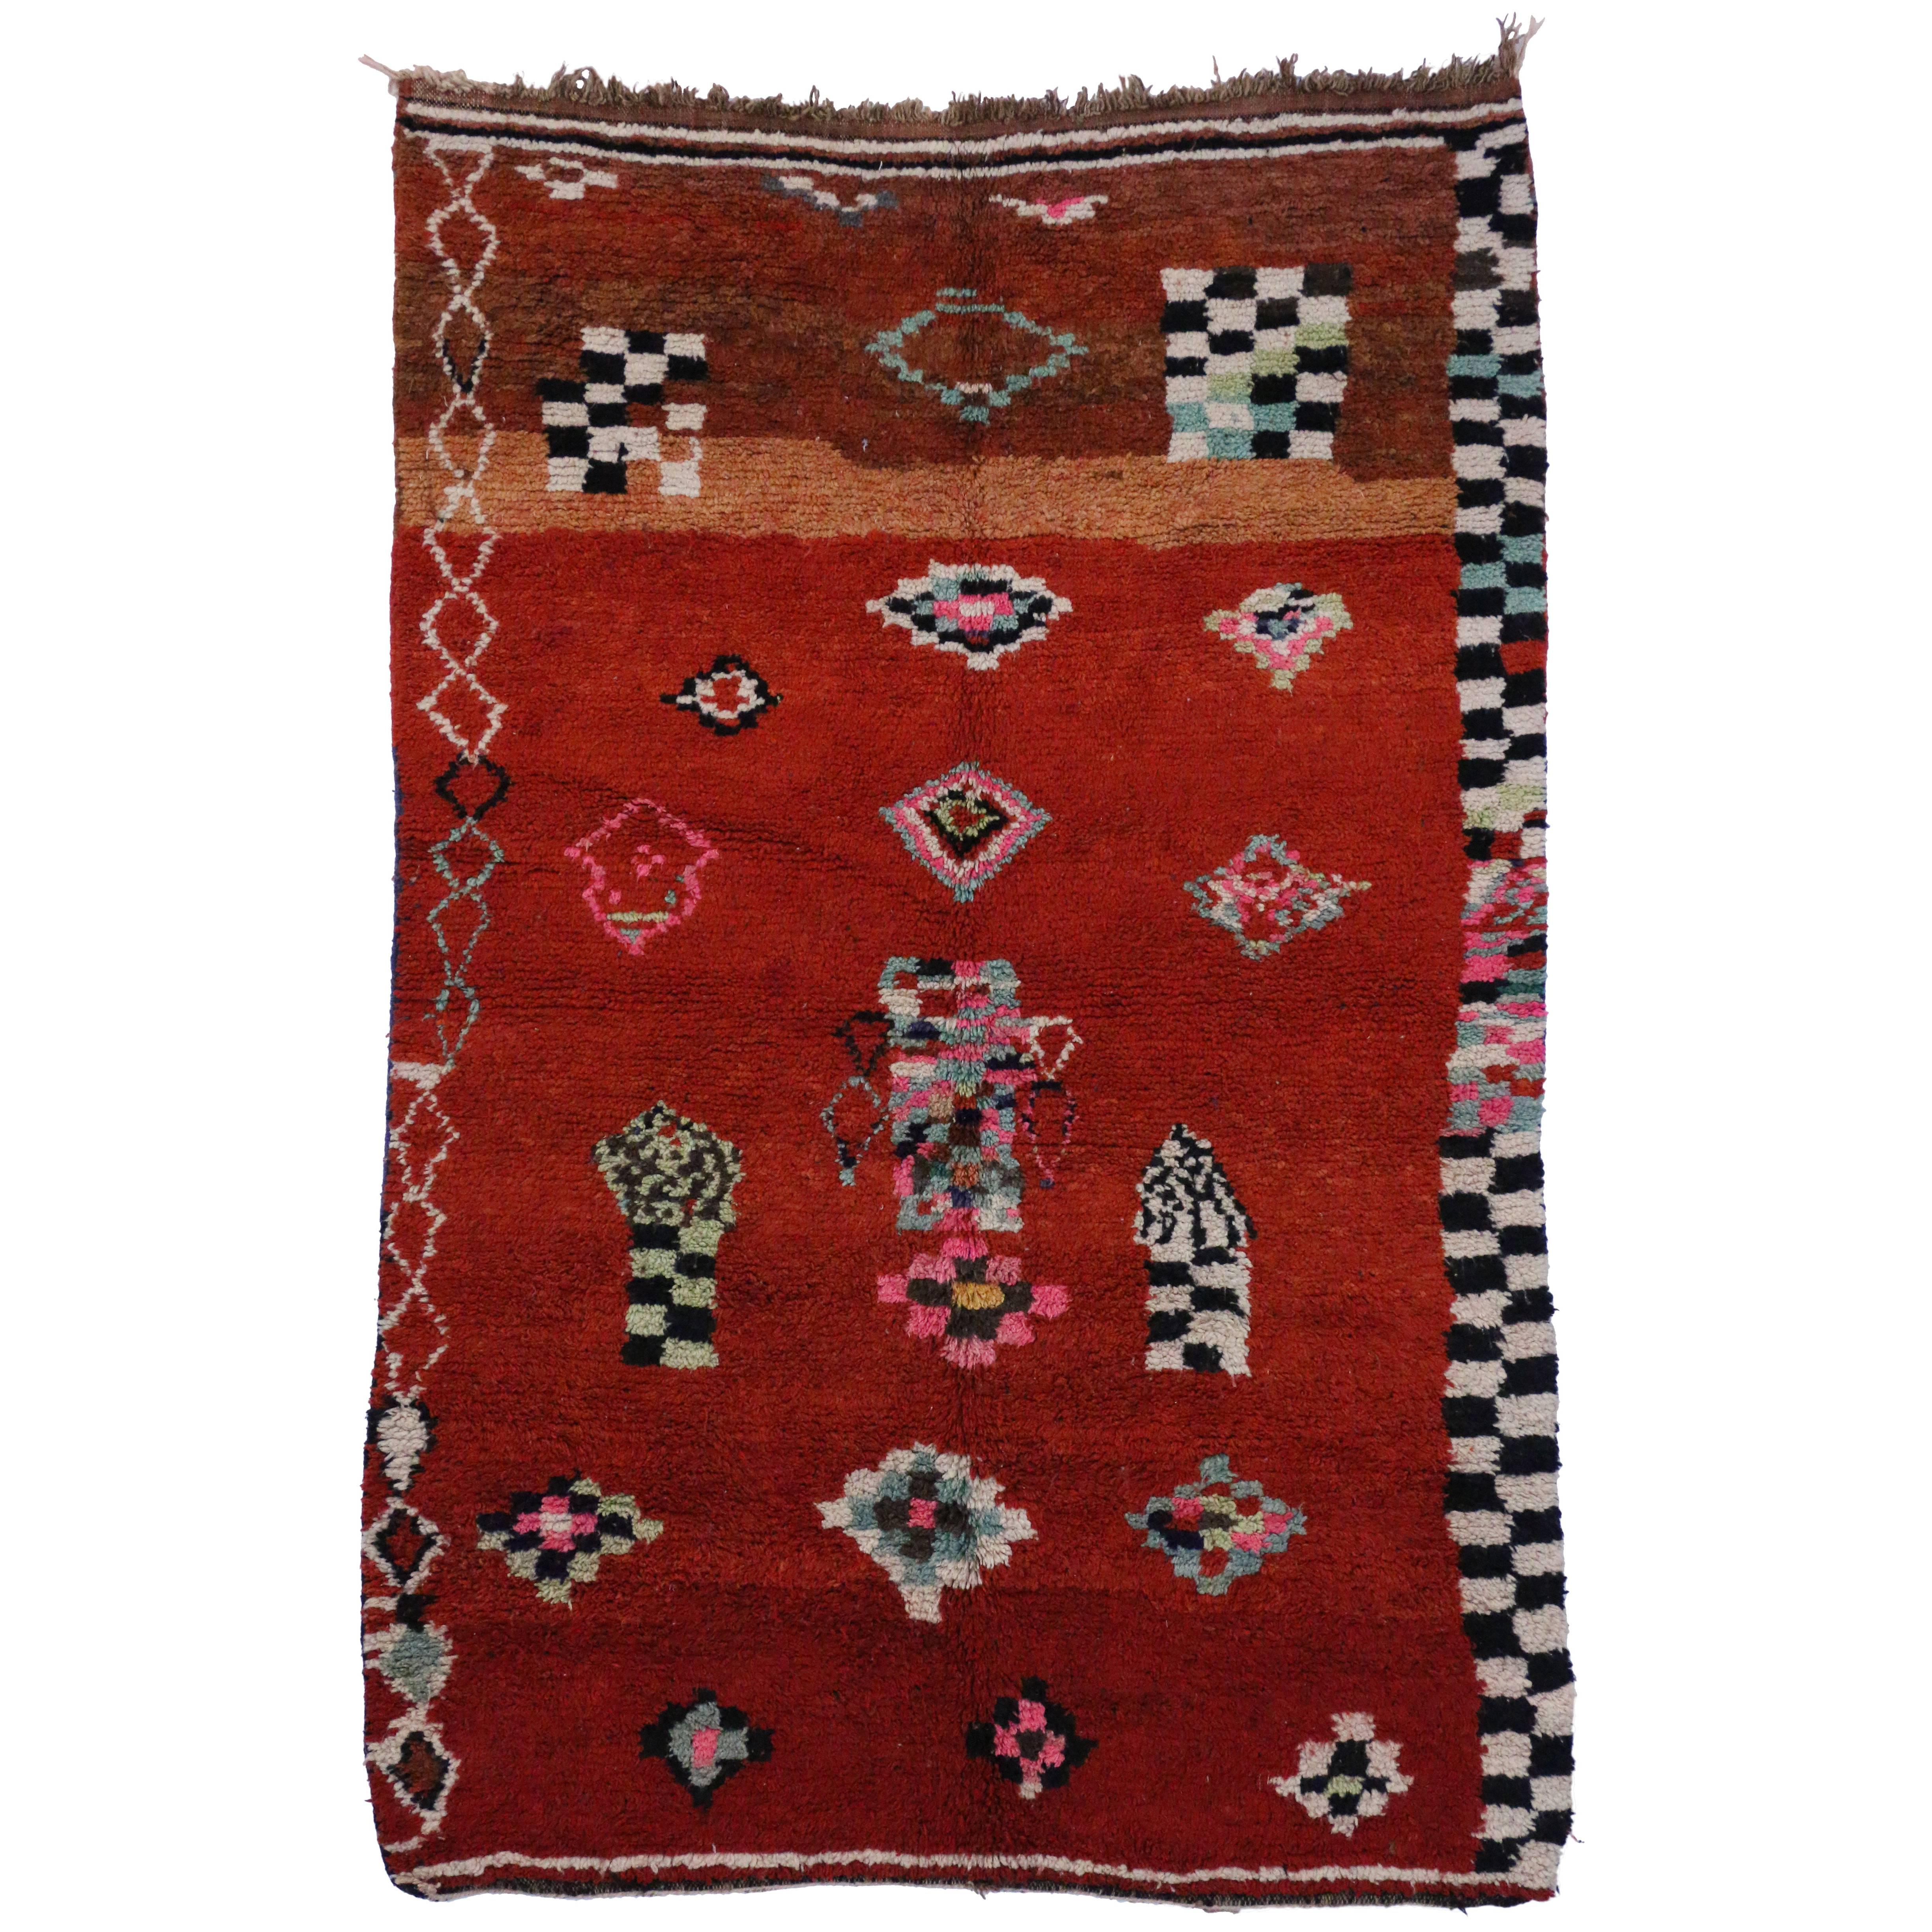 Boho Chic Berber Moroccan Rug with Contemporary Abstract Design